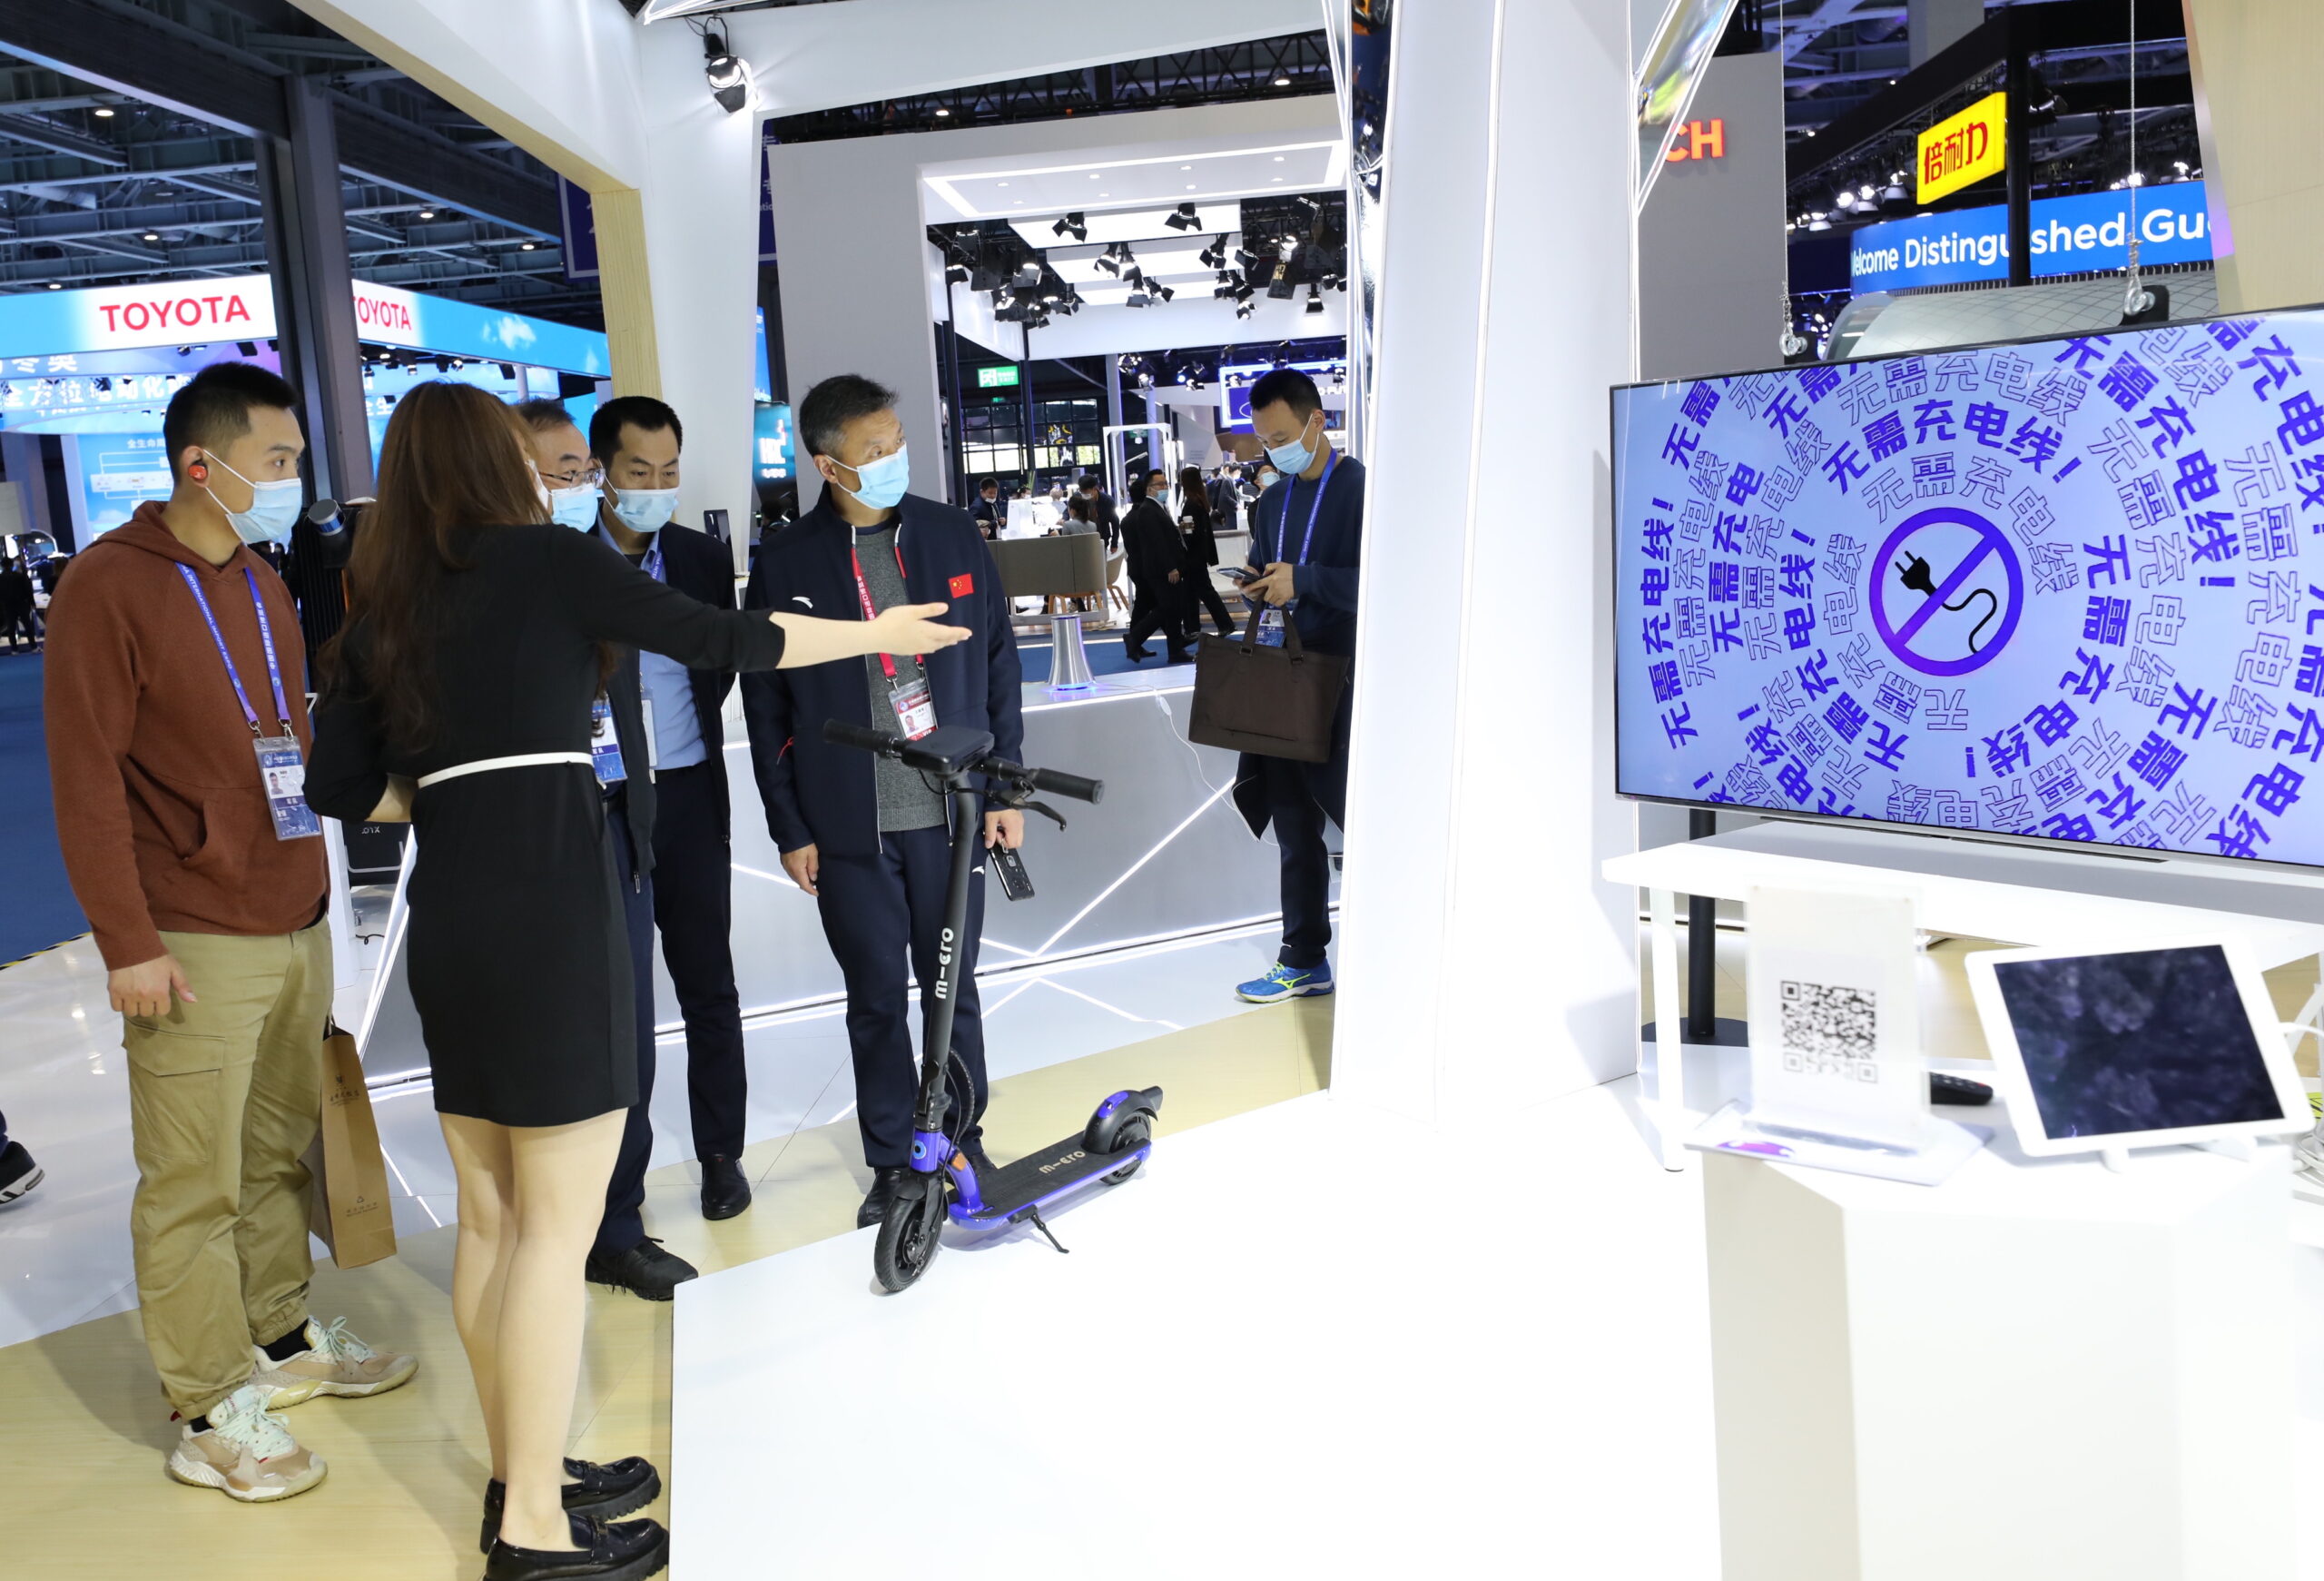 REASONANCE presented its technology at CIIE2021 expo in Shanghai